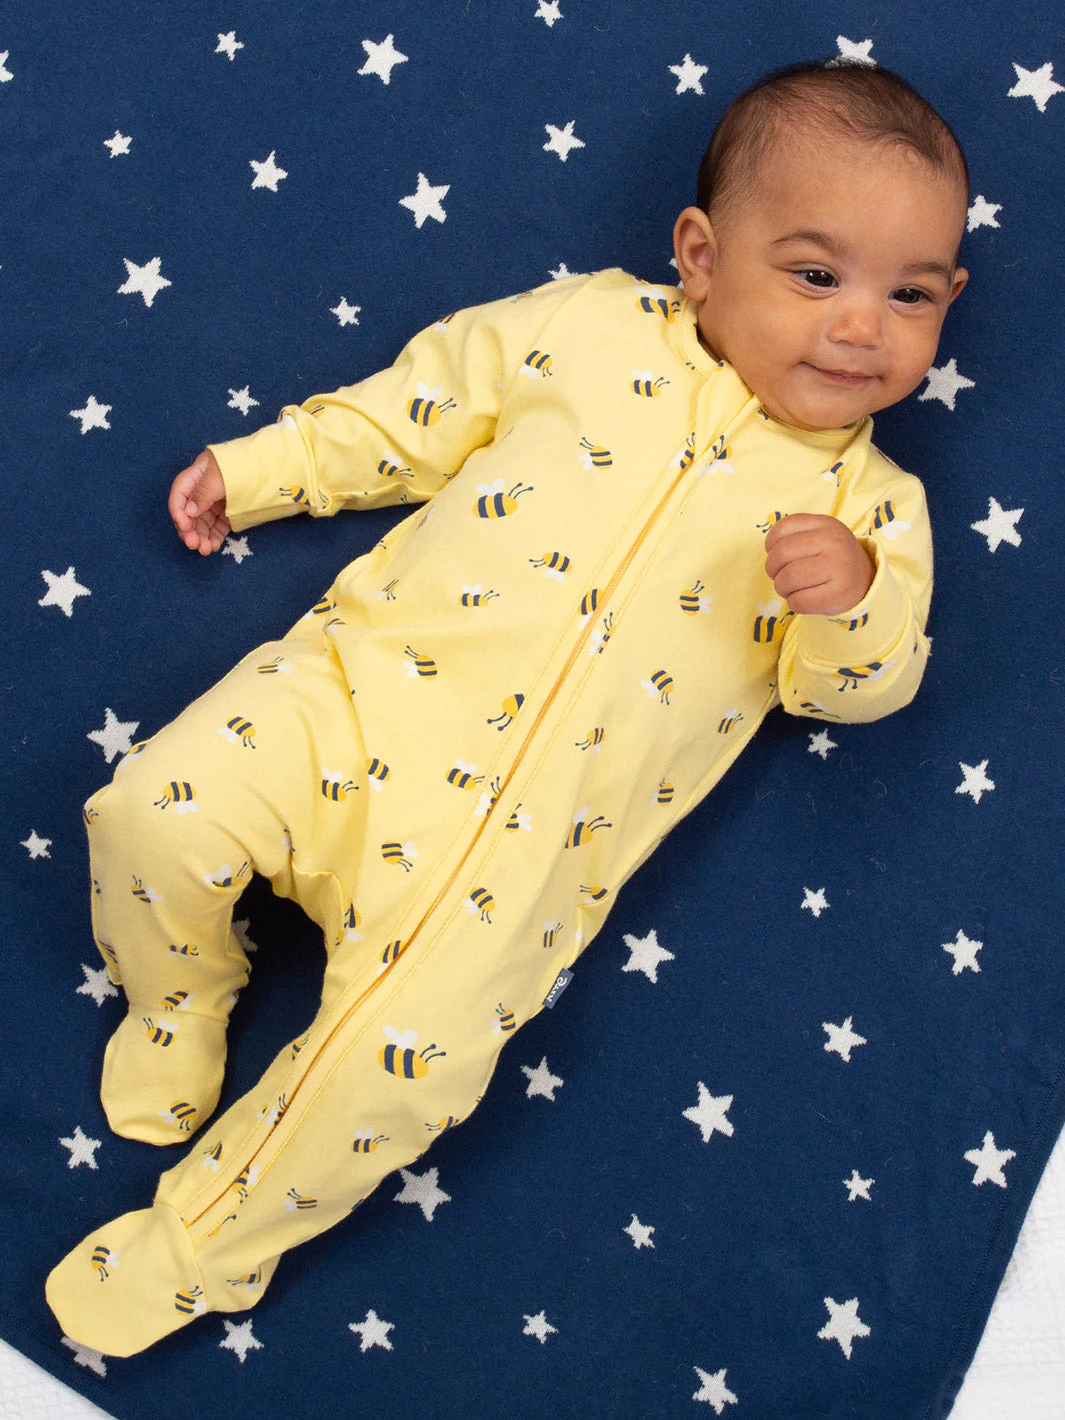 Bumble Sleepsuit by Kite